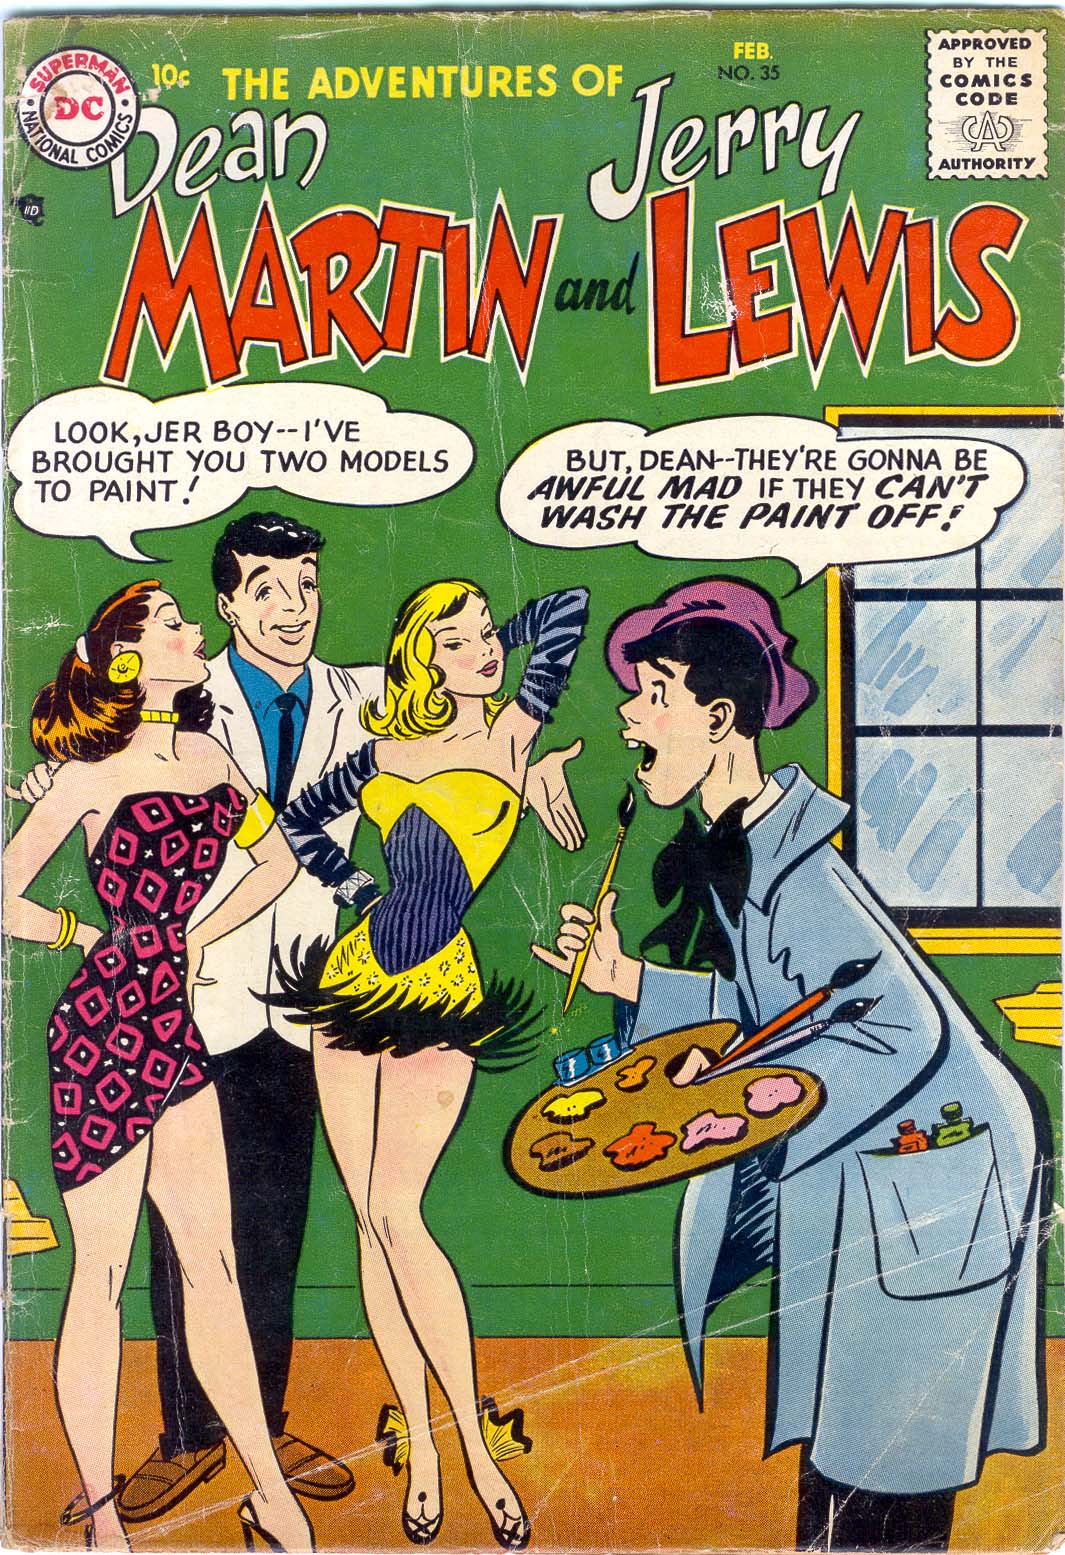 The Adventures of Dean Martin and Jerry Lewis 35 Page 1